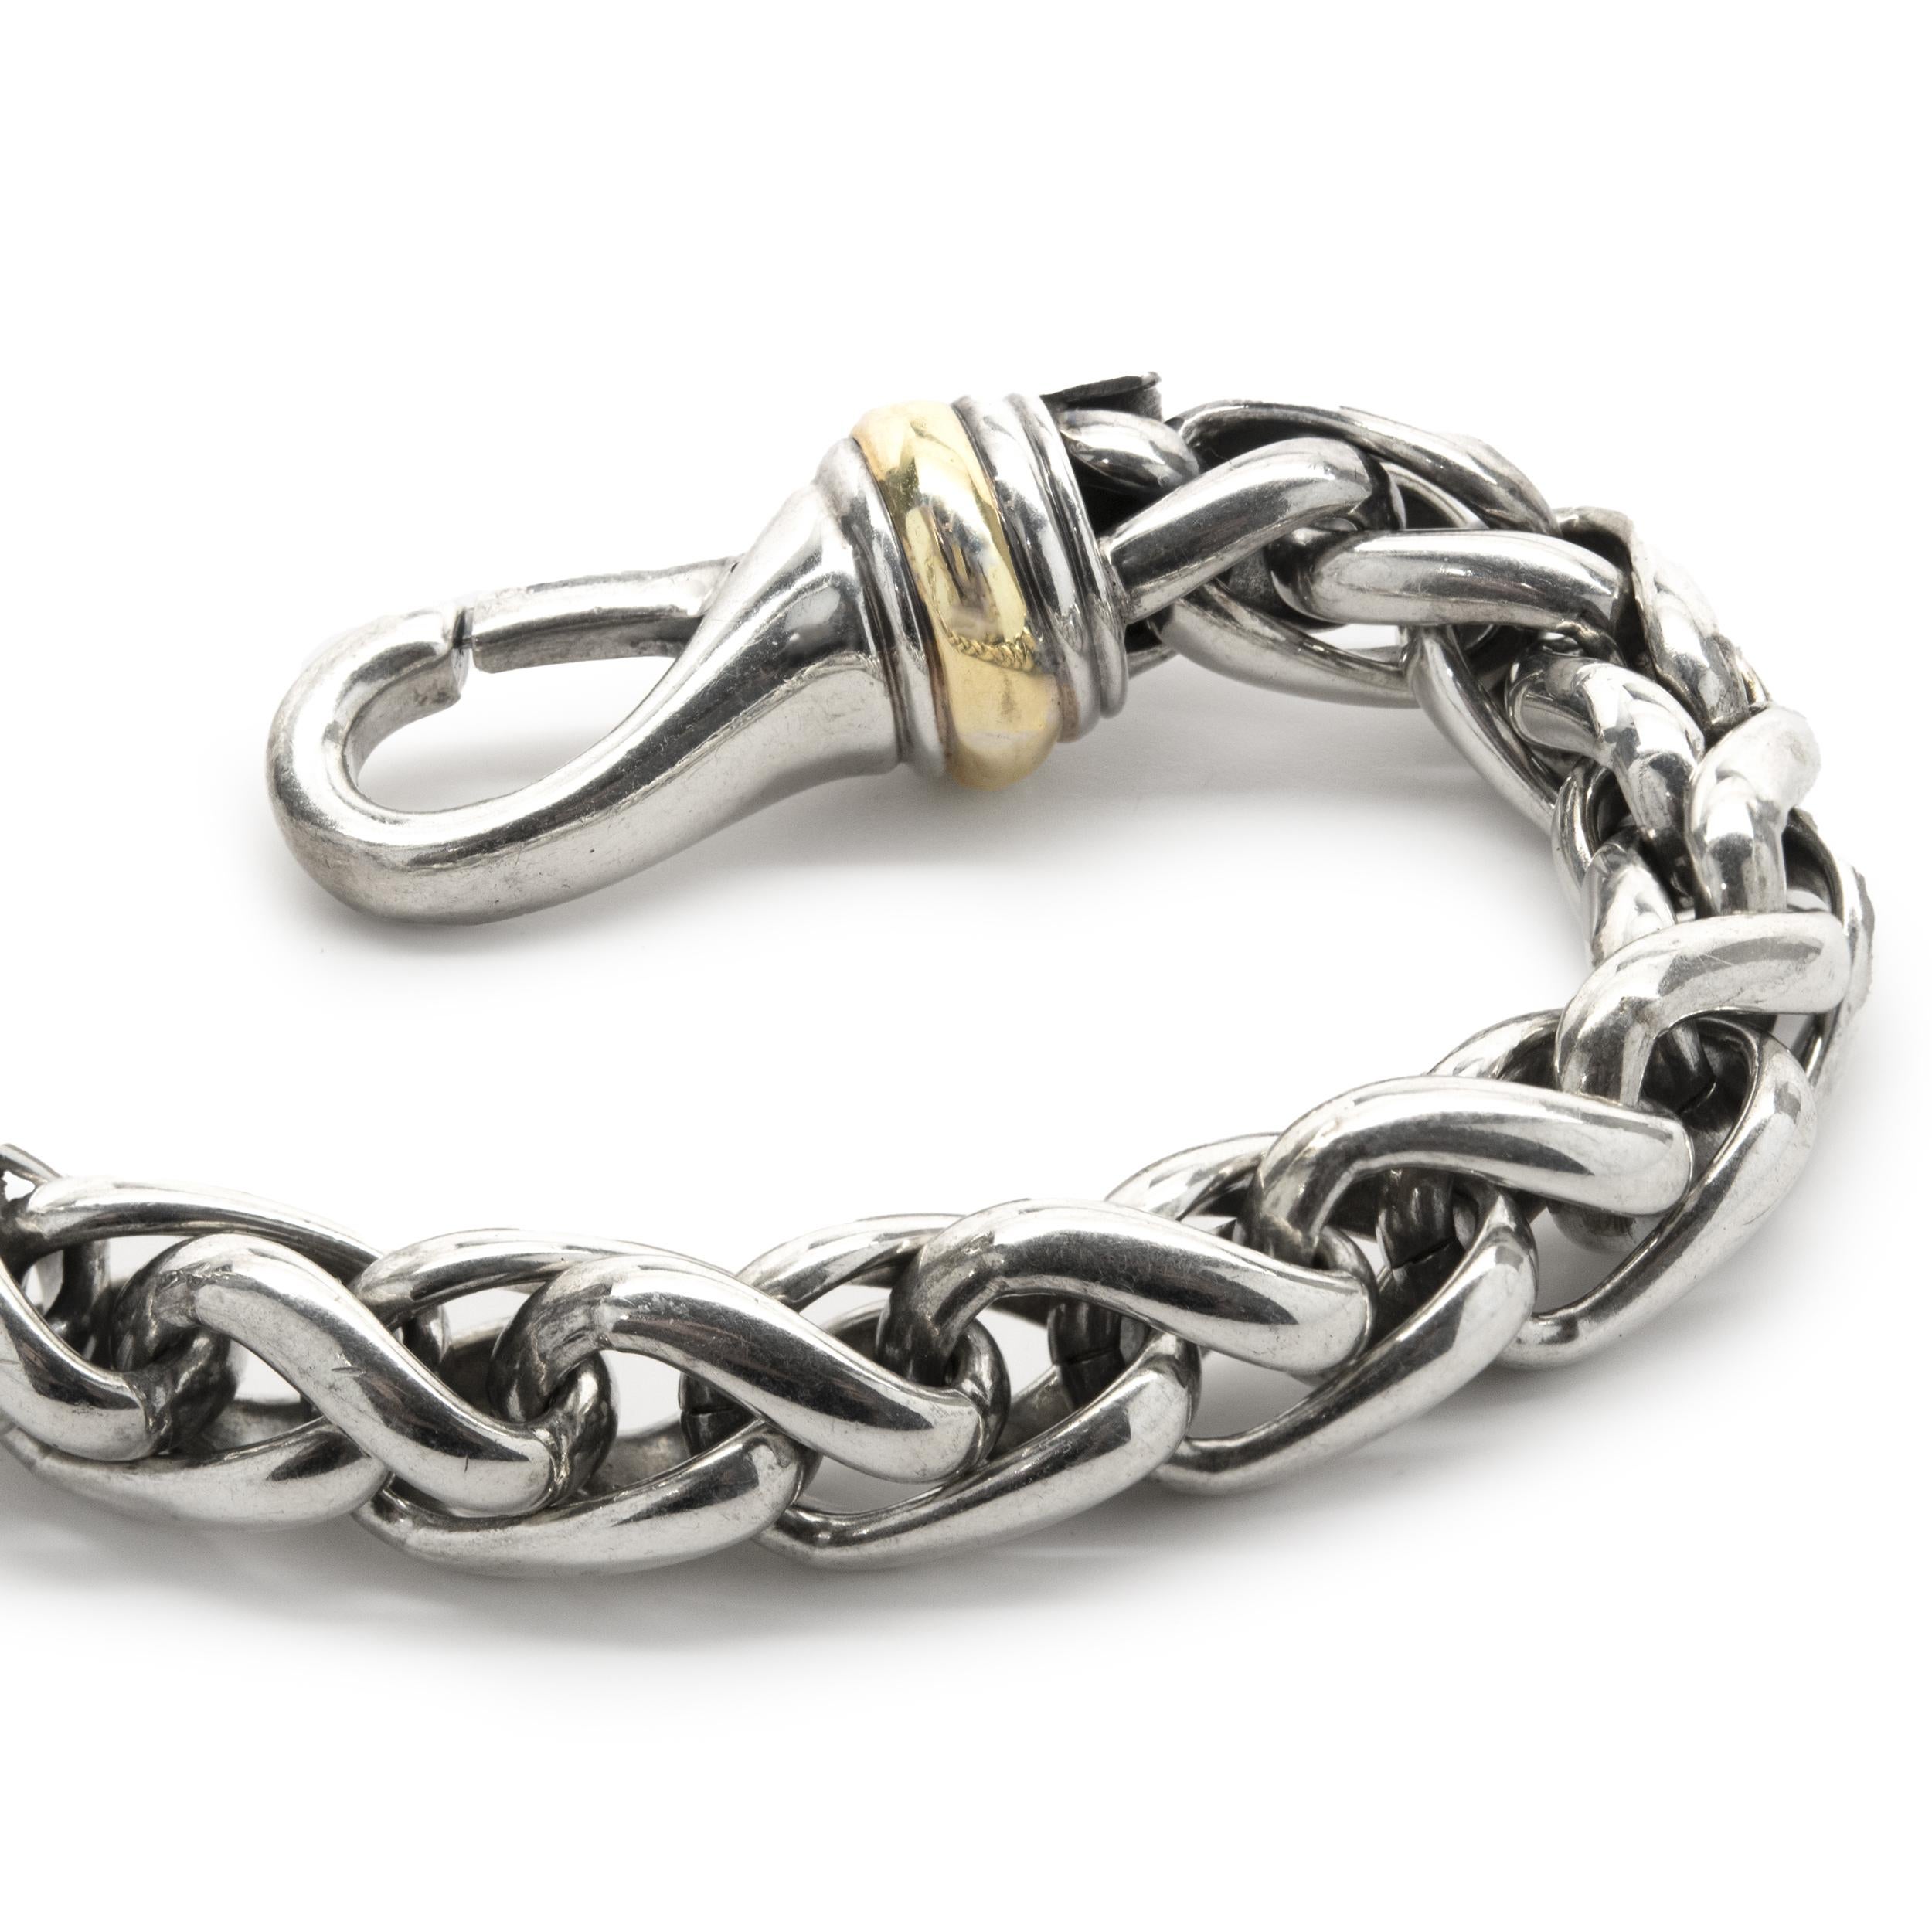 Designer: David Yurman
Material: sterling silver & 14K yellow gold
Dimensions: necklace measures 18-inches in length
Weight: 97.66 grams
